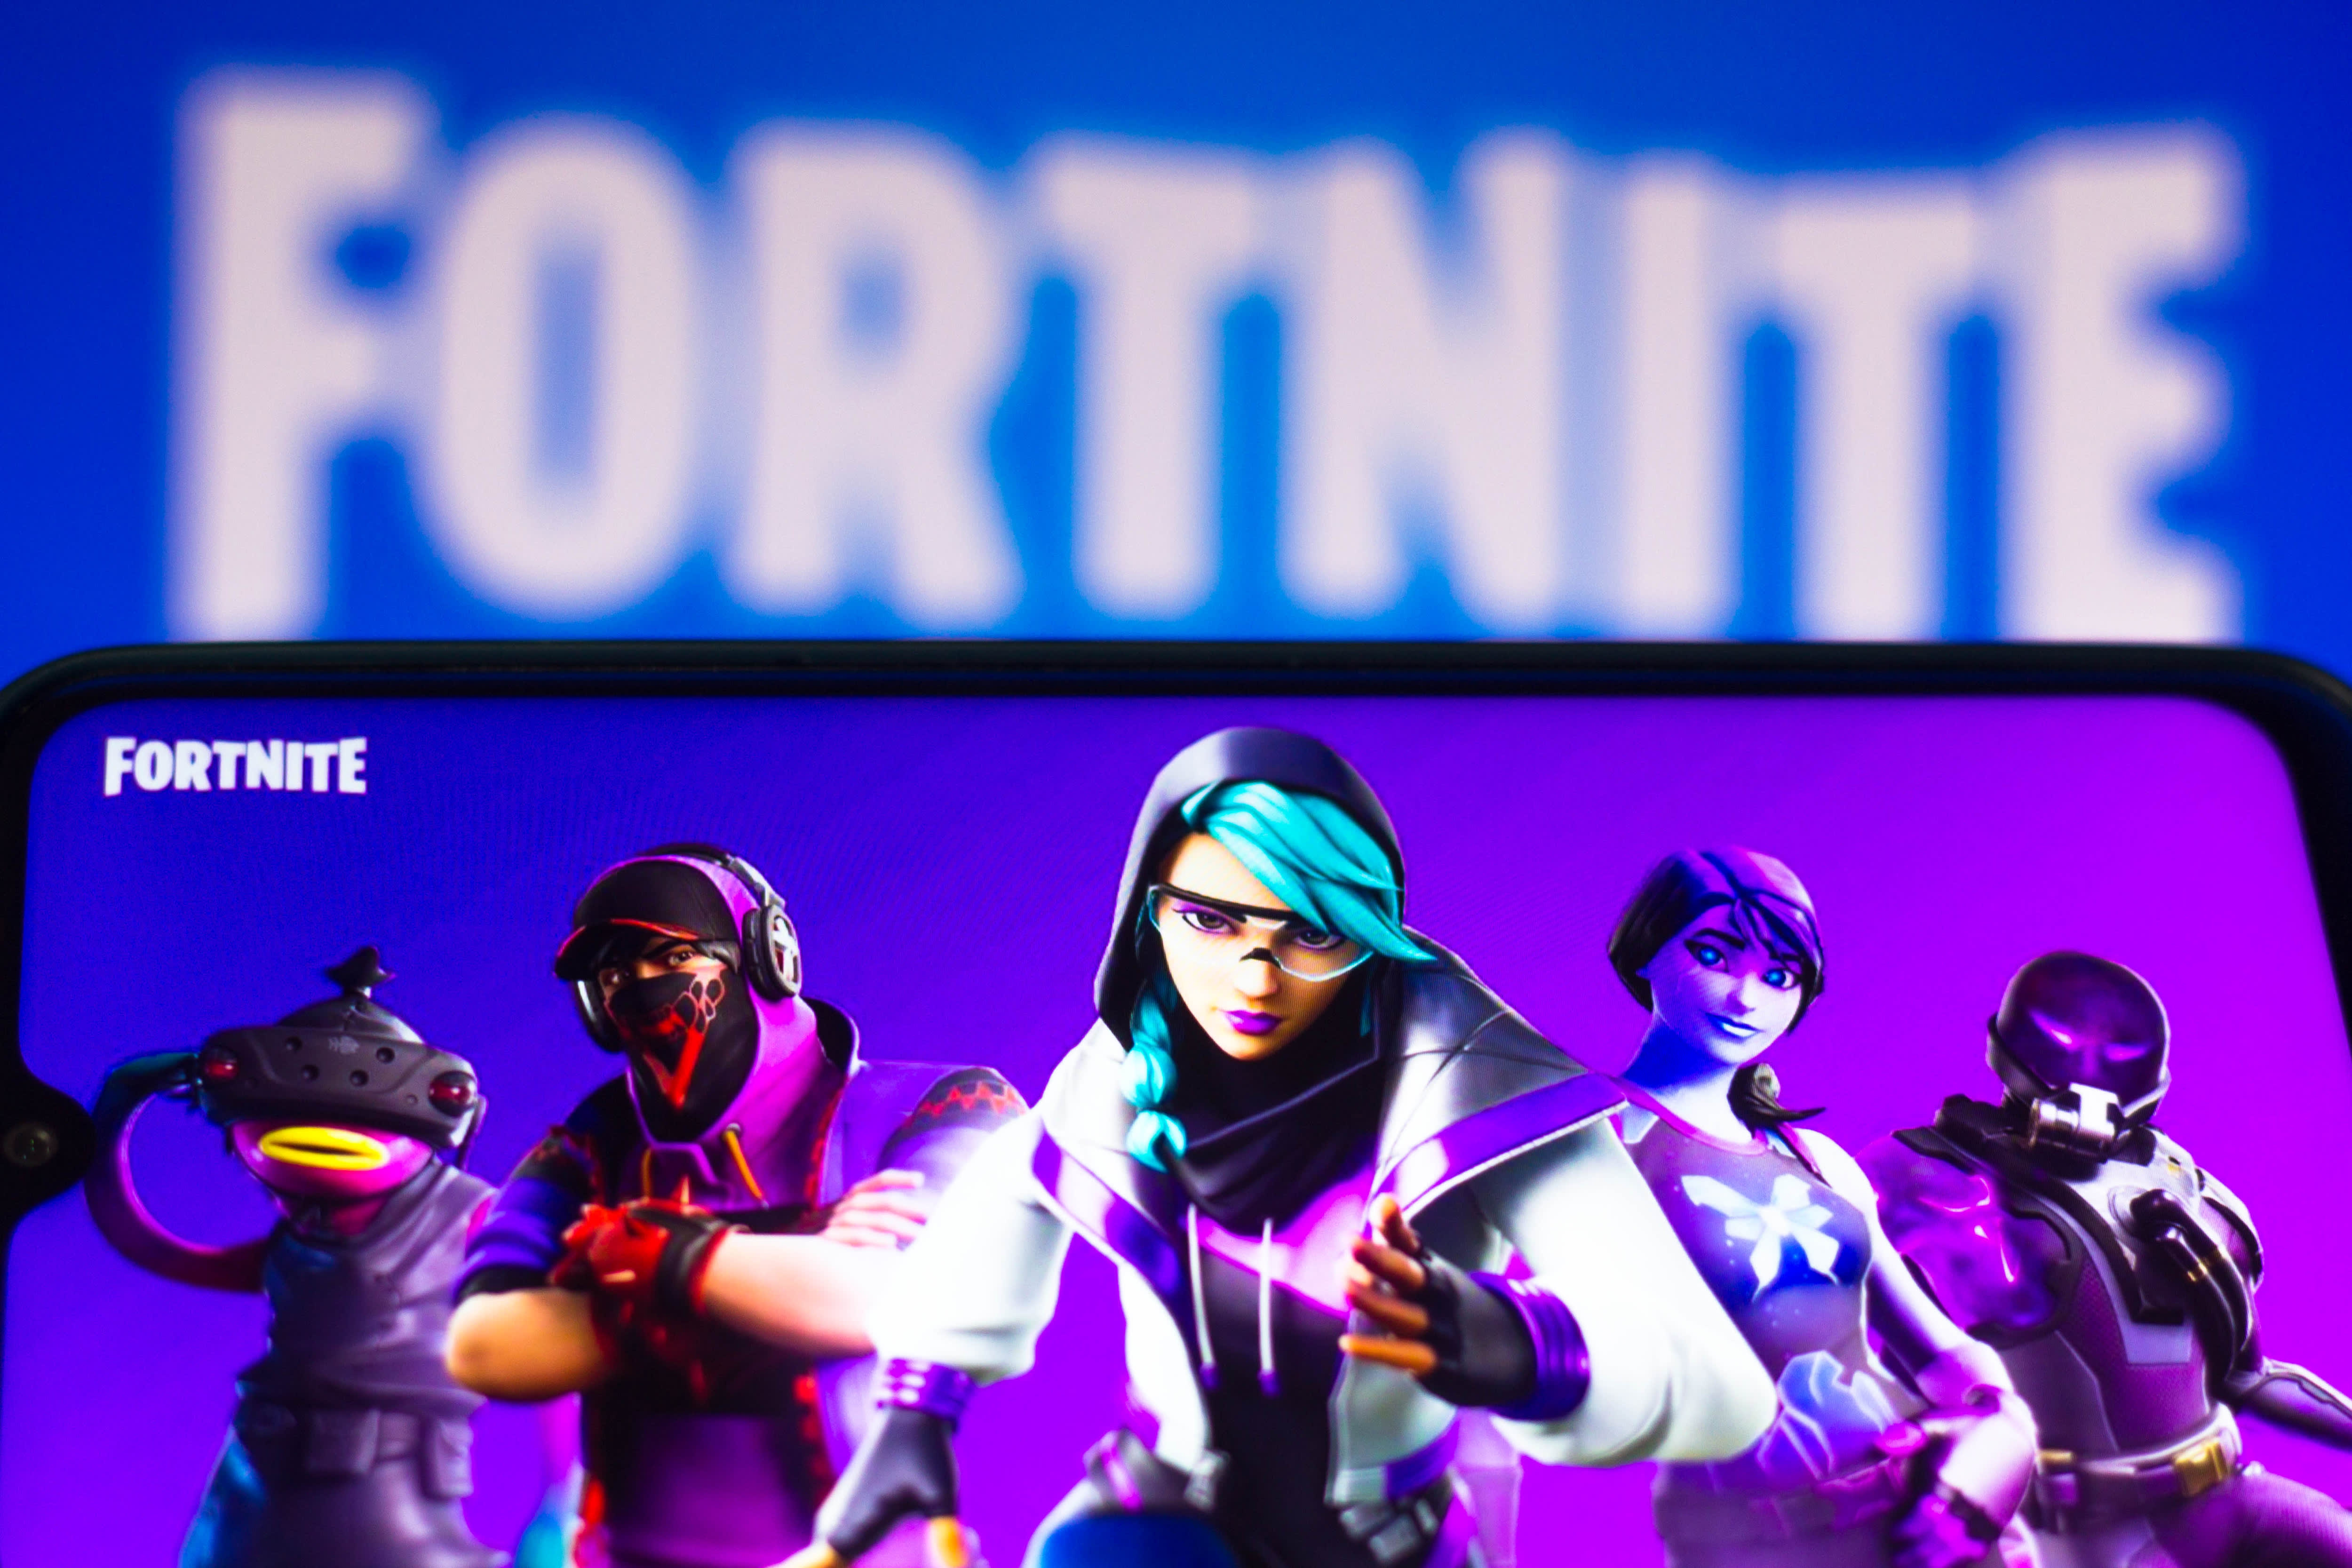 restaurant Rådgiver forhindre Epic Games, Fortnite $245 million refunds to players: Who qualifies